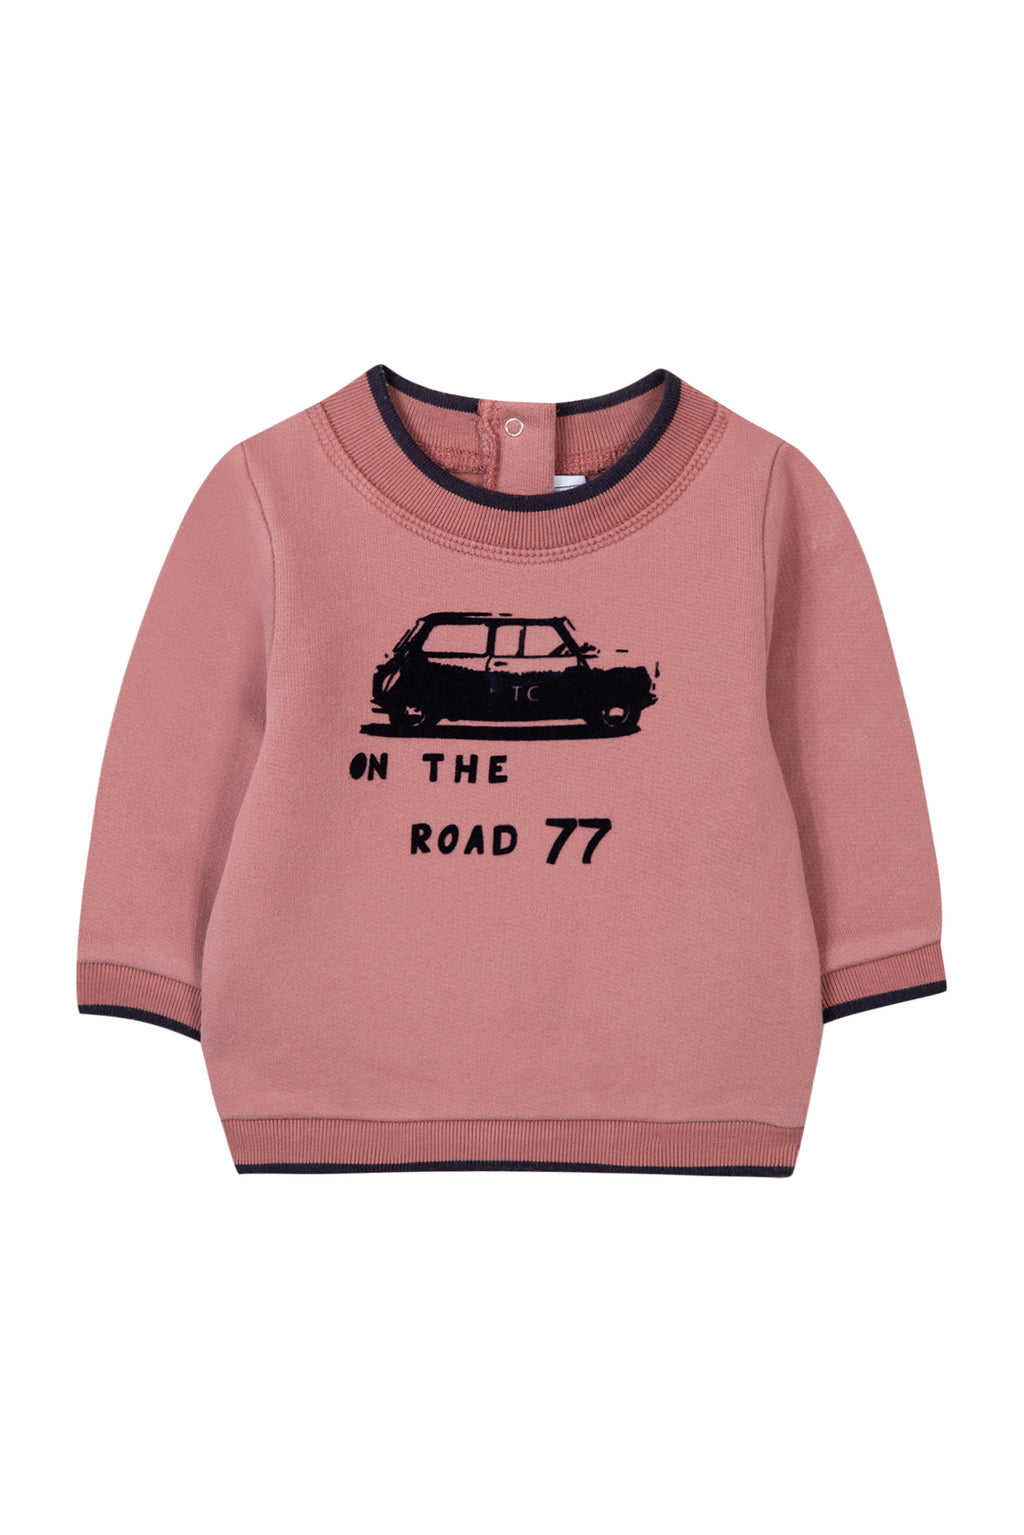 Sweat - Sienne coton illustration taxi